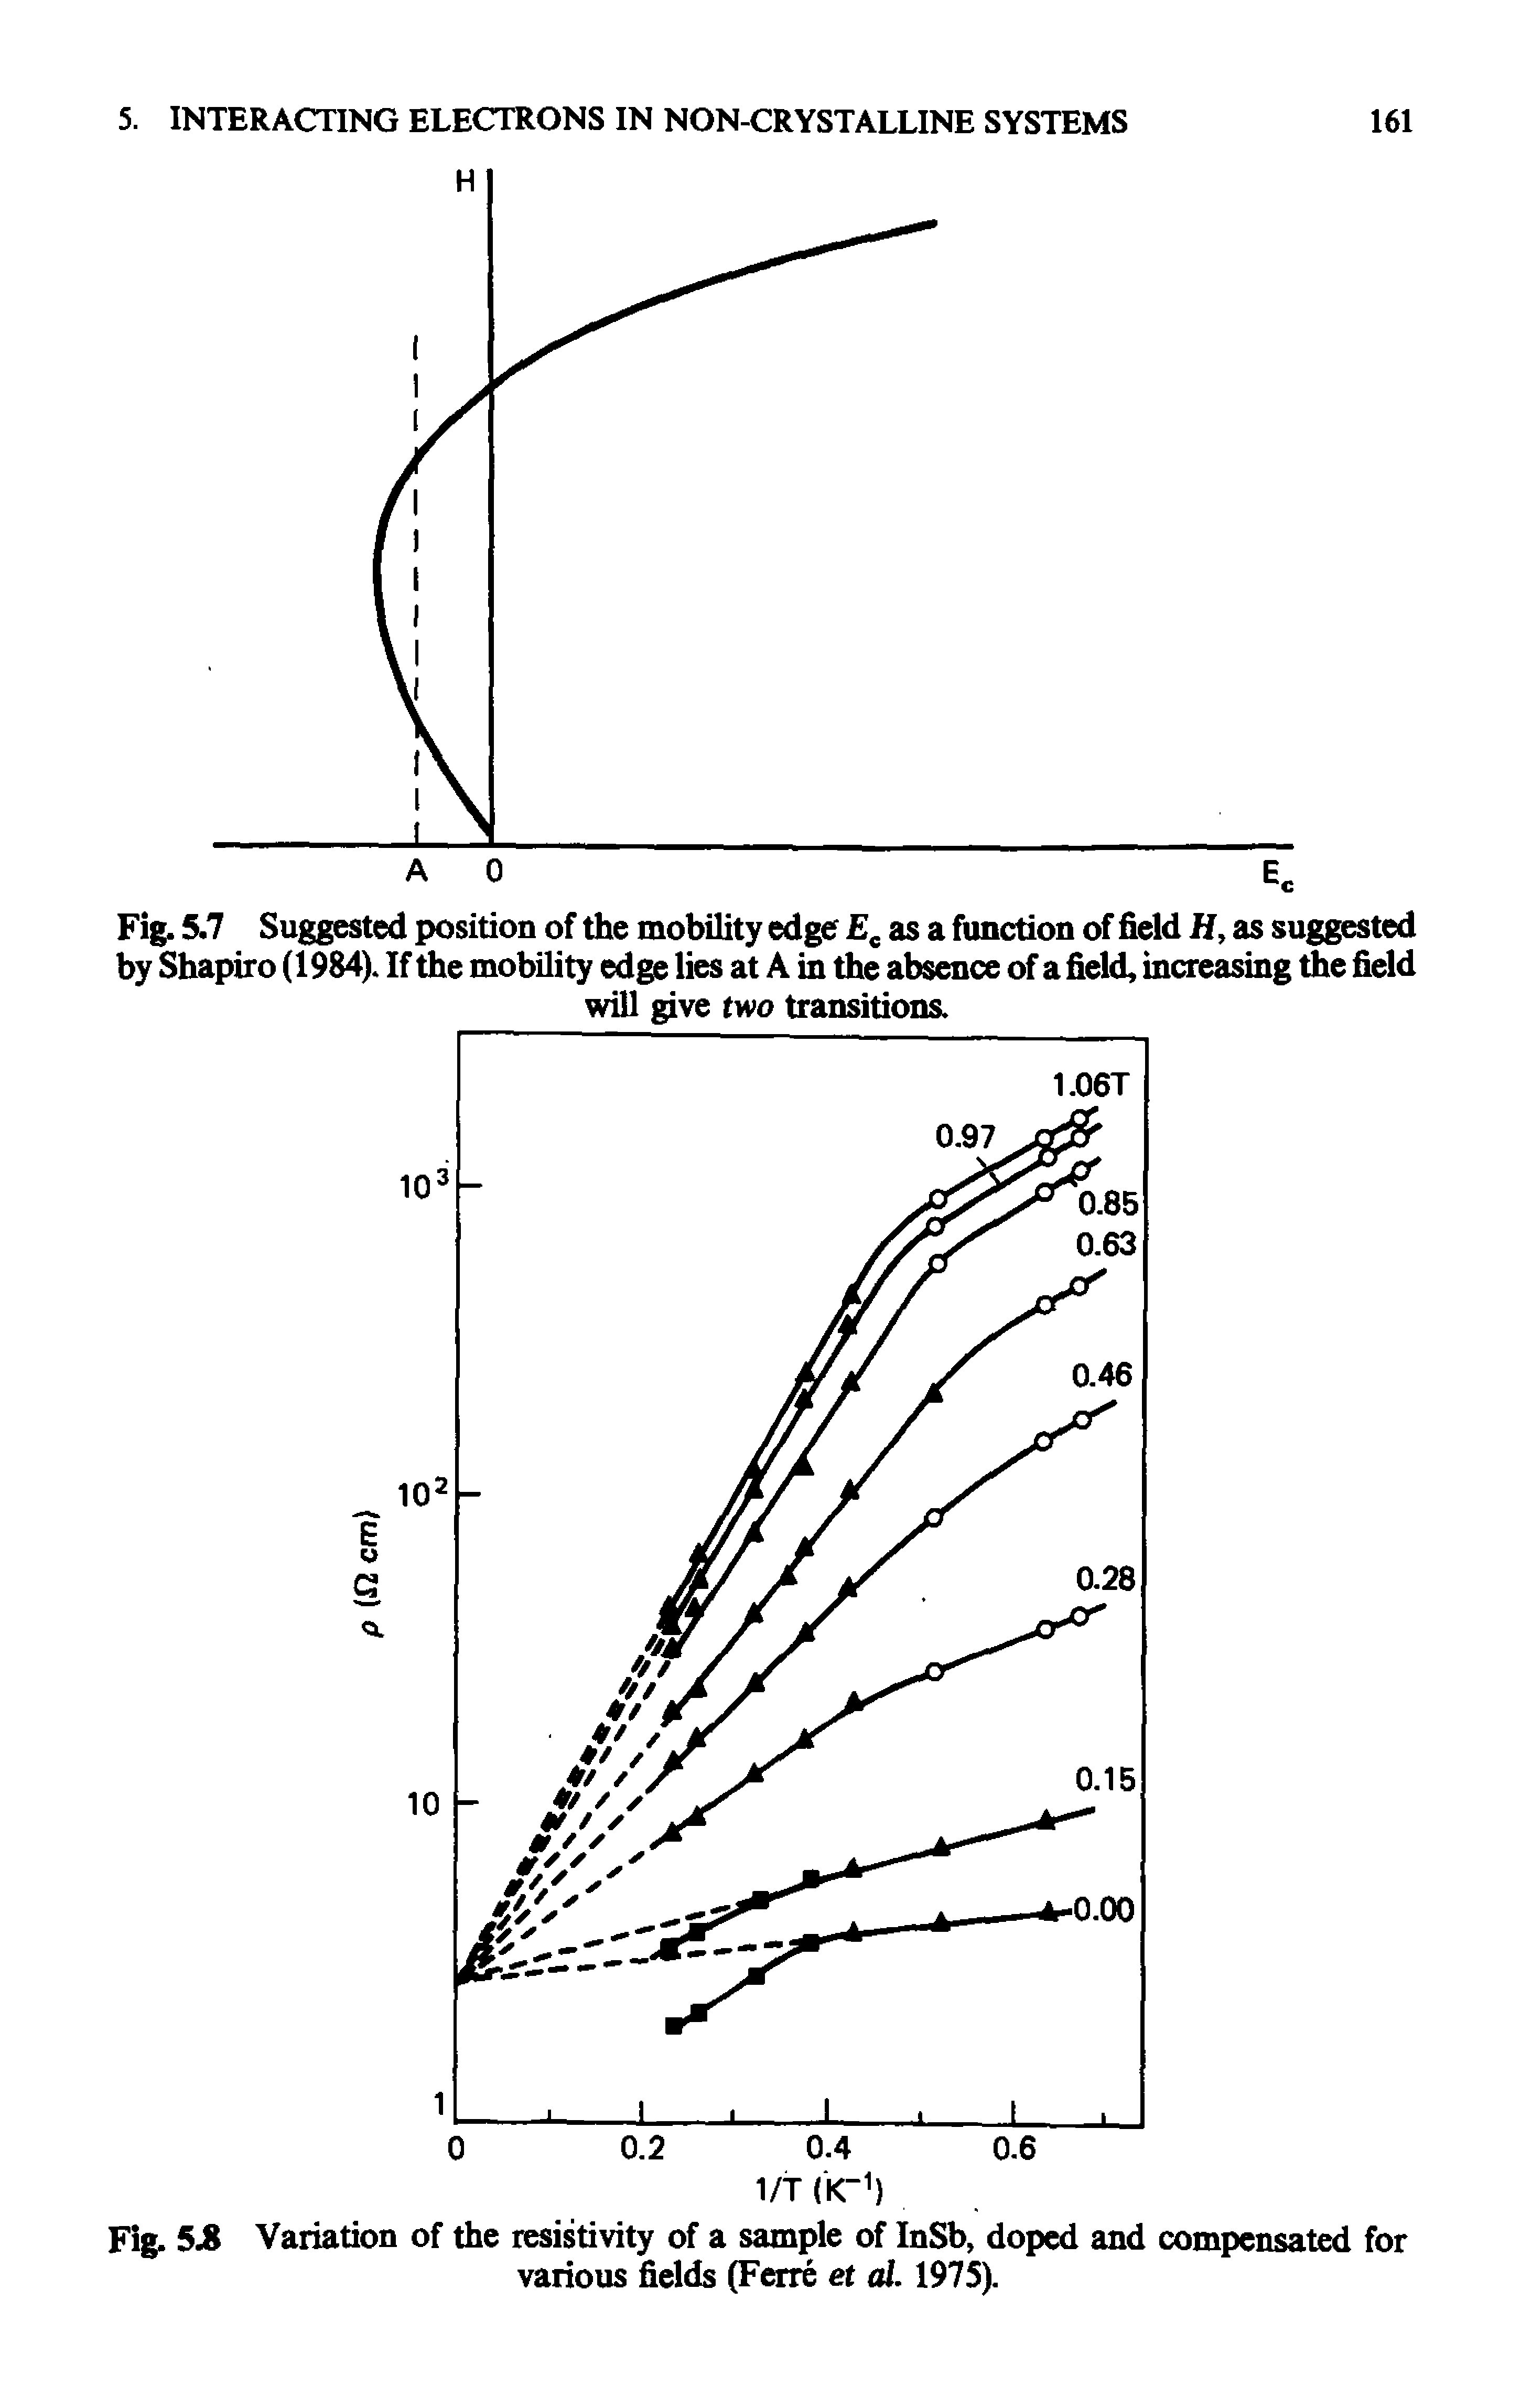 Fig. 5.7 Suggested position of the mobility edge Ee as a function of field H, as suggested by Shapiro (1984). If the mobility edge lies at A in the absence of a field, increasing the field...